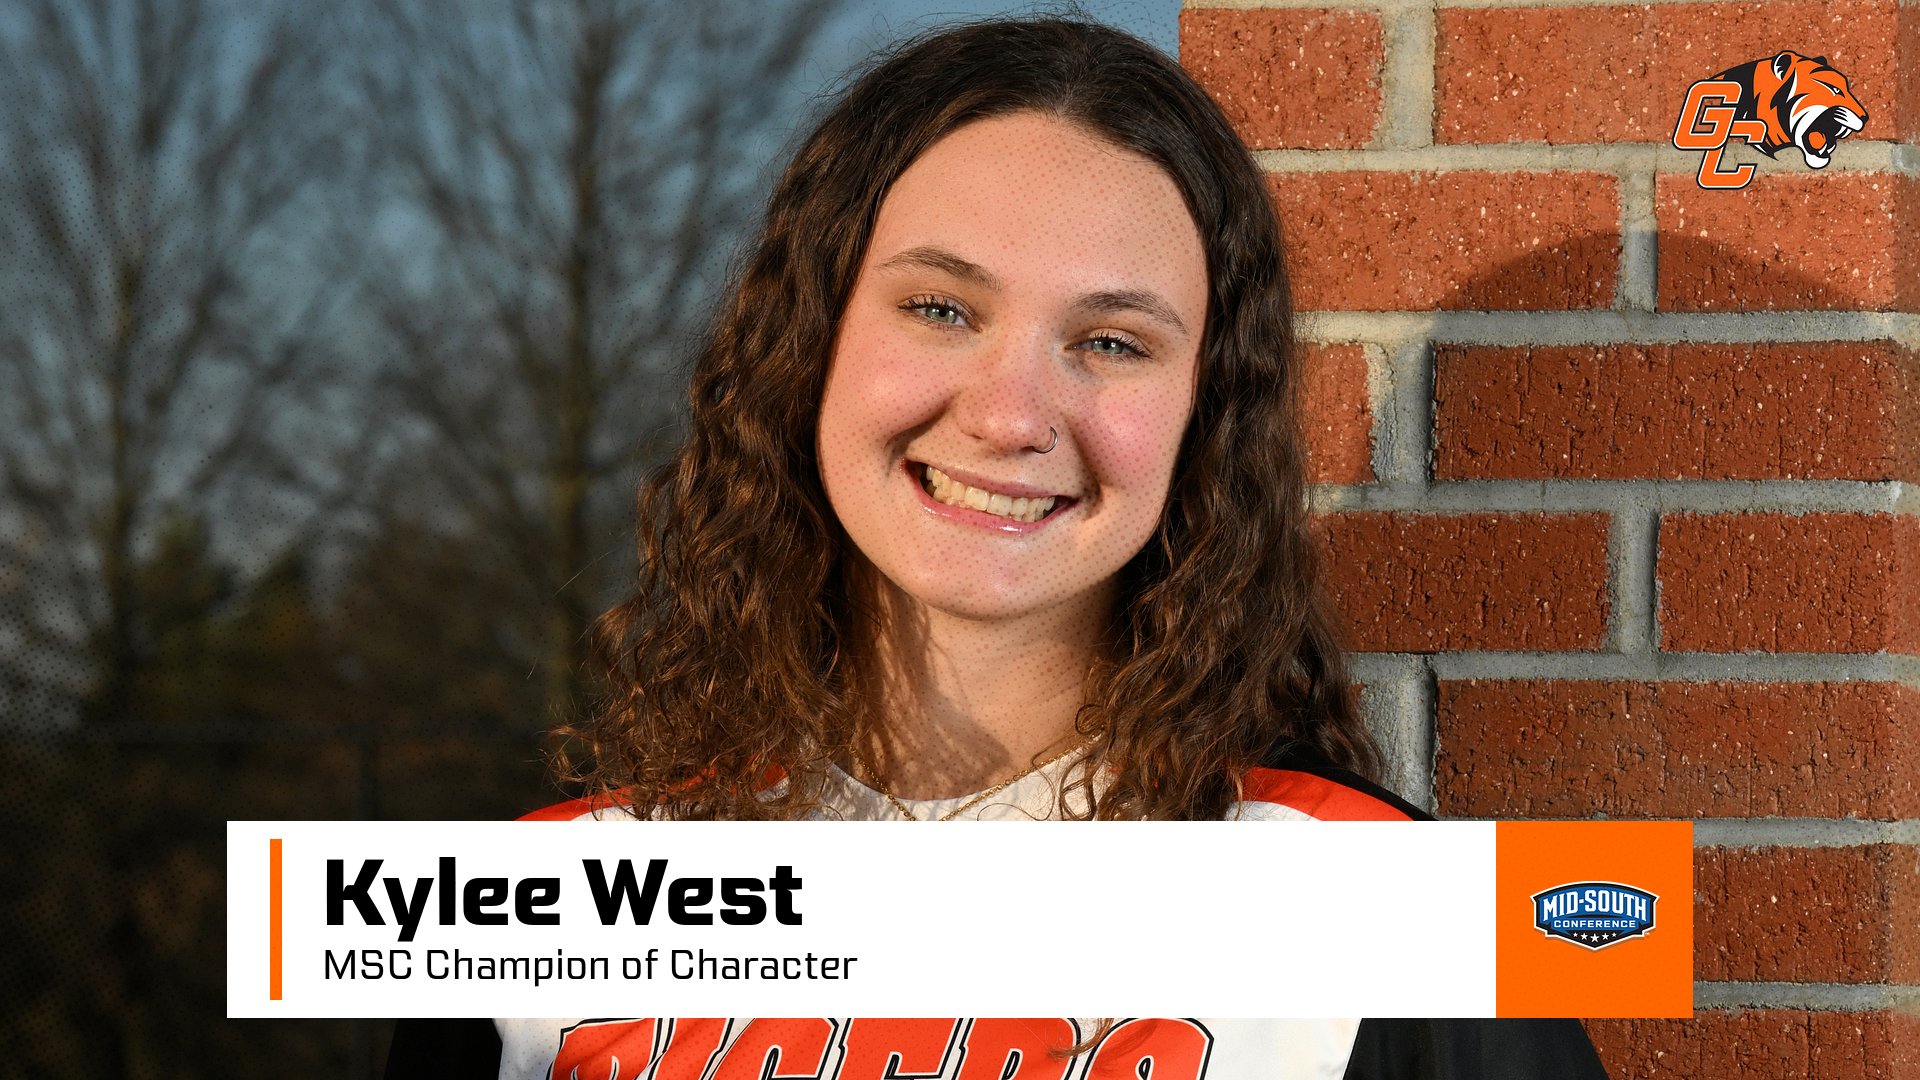 Kylee West named MSC Champion of Character